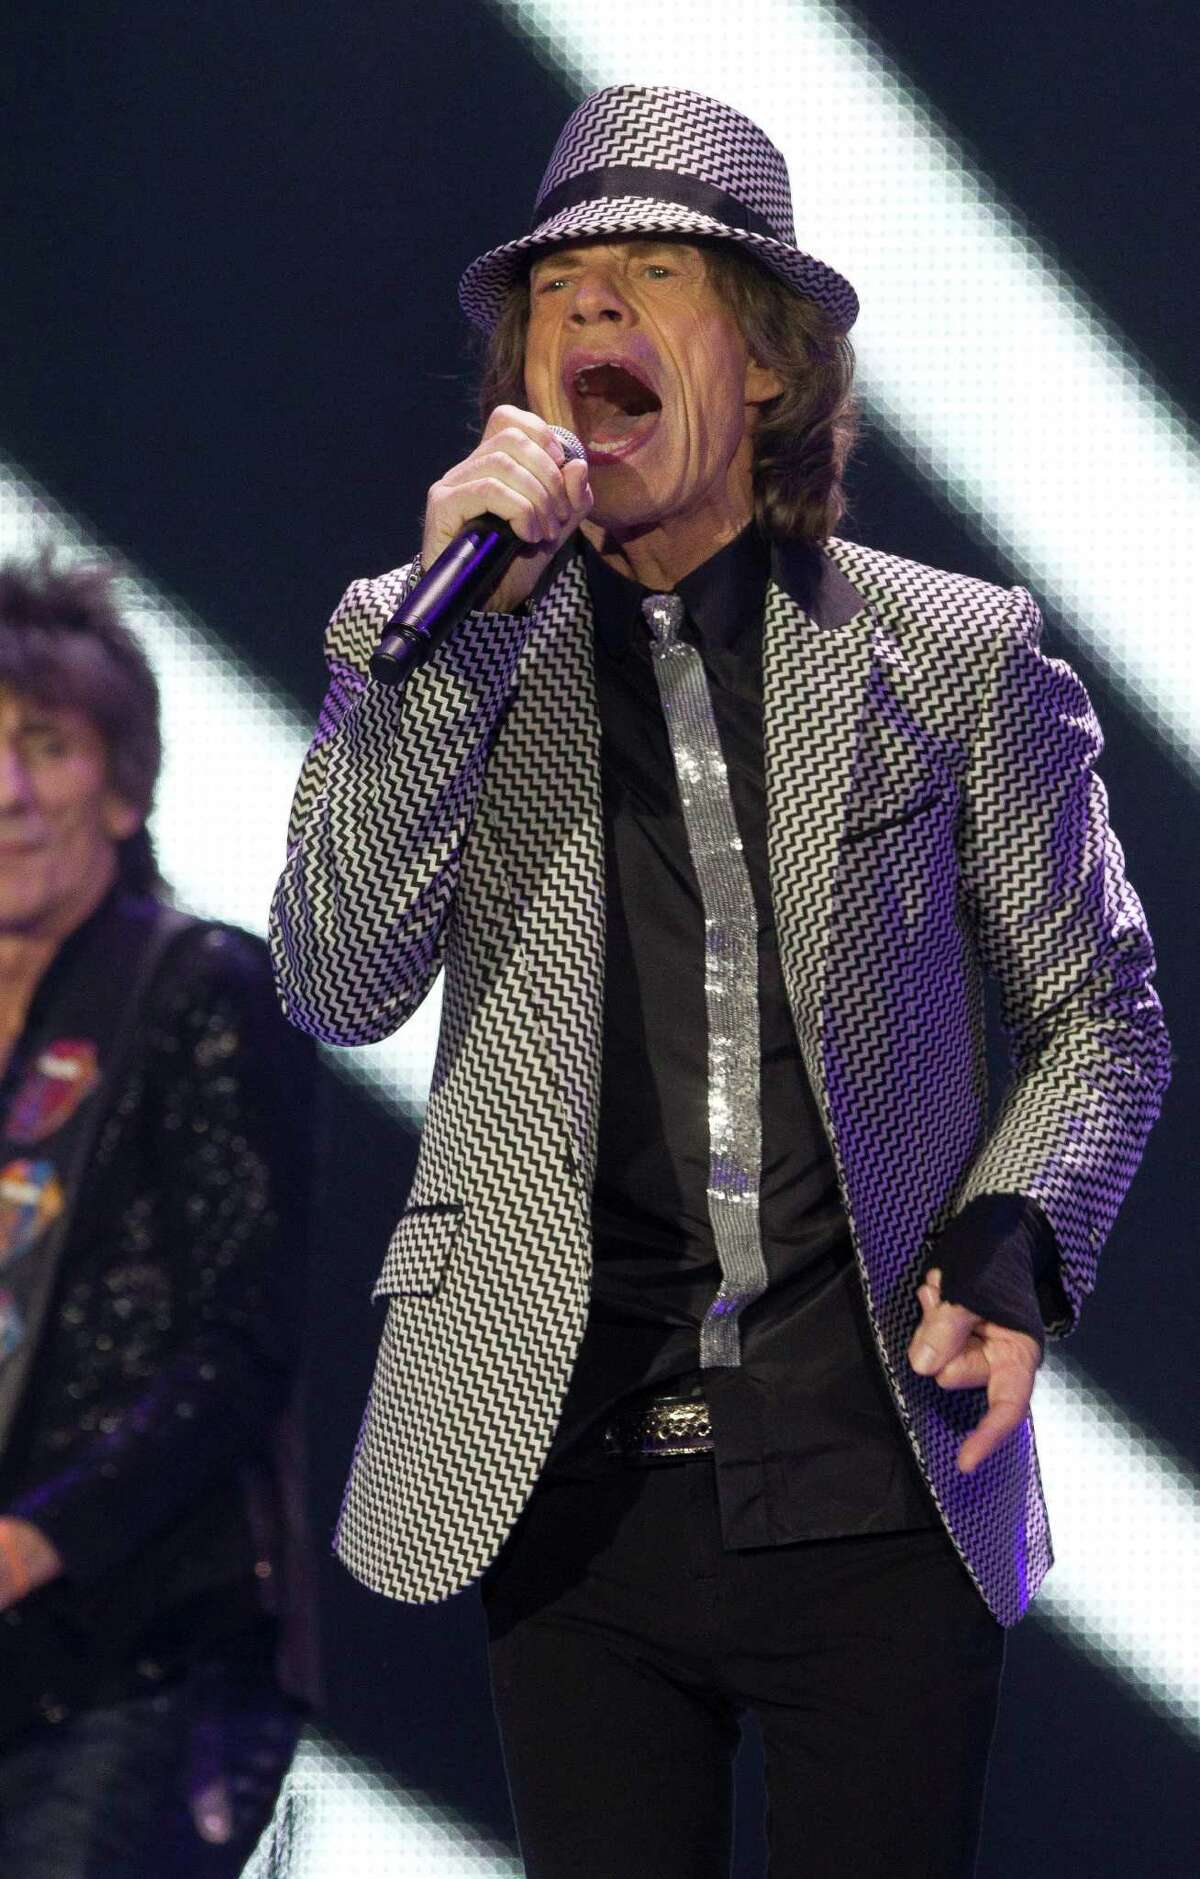 Mick Jagger, of The Rolling Stones, is shown performing in east London in 2012. A spokeswoman says the band doesn't want Donald Trump playing its songs at his rallies. 